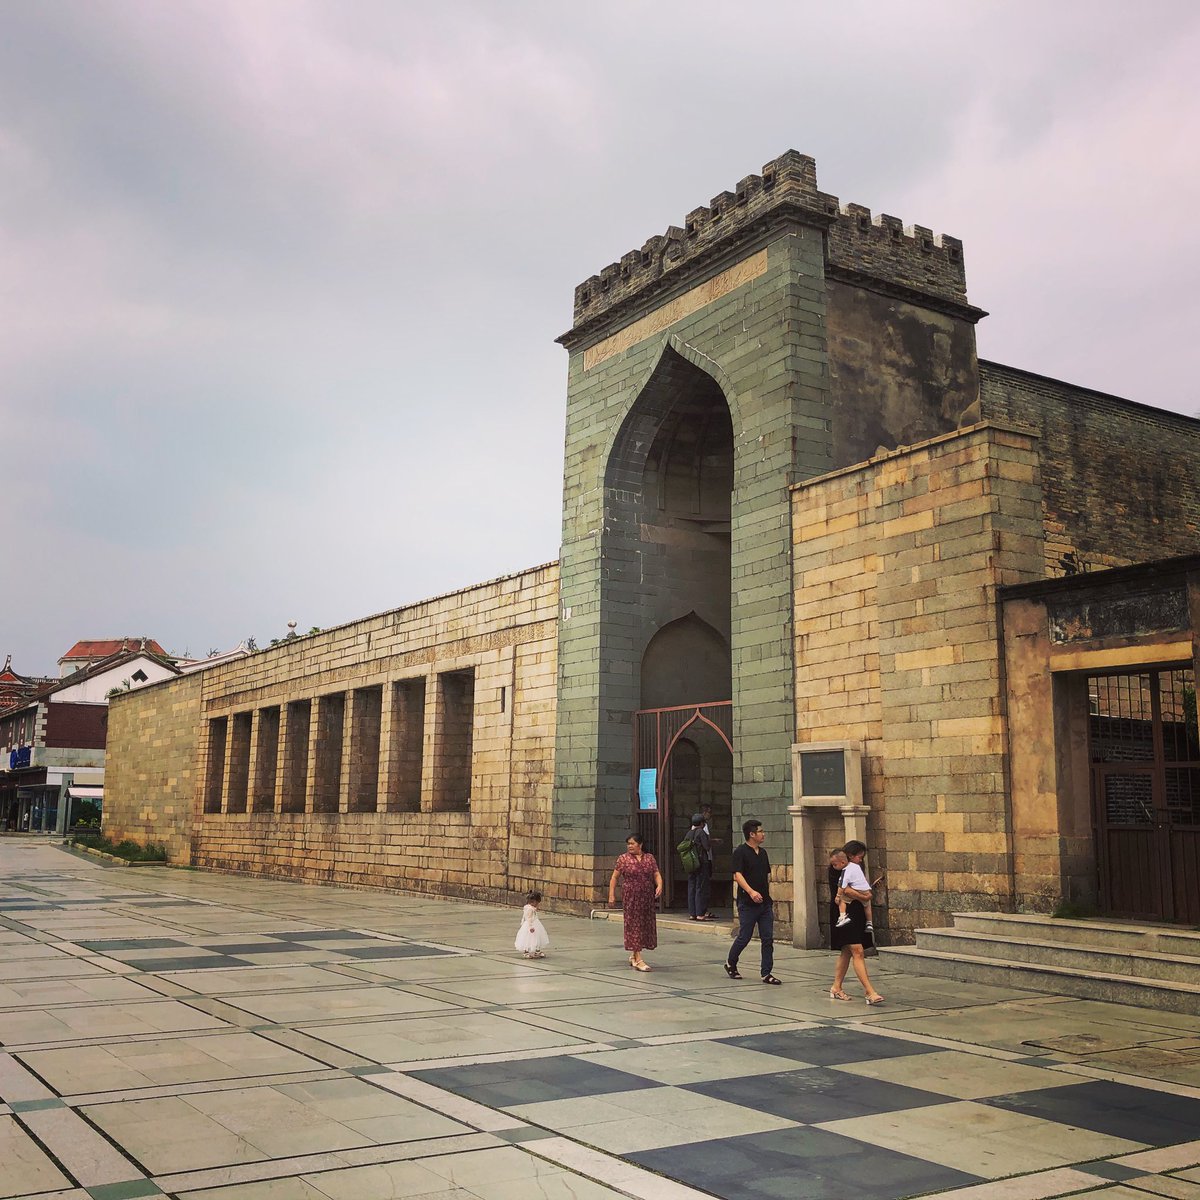 First up: Quanzhou’s Muslims, who today still live in scattered towns. The extent mosque dates to 11th c. Reputedly as early as 618 Mohammed’s disciples came evangelising to the port. A Tang shrine encloses their hill tombs, and extensive Arabic epigraphy has been found. 2/11